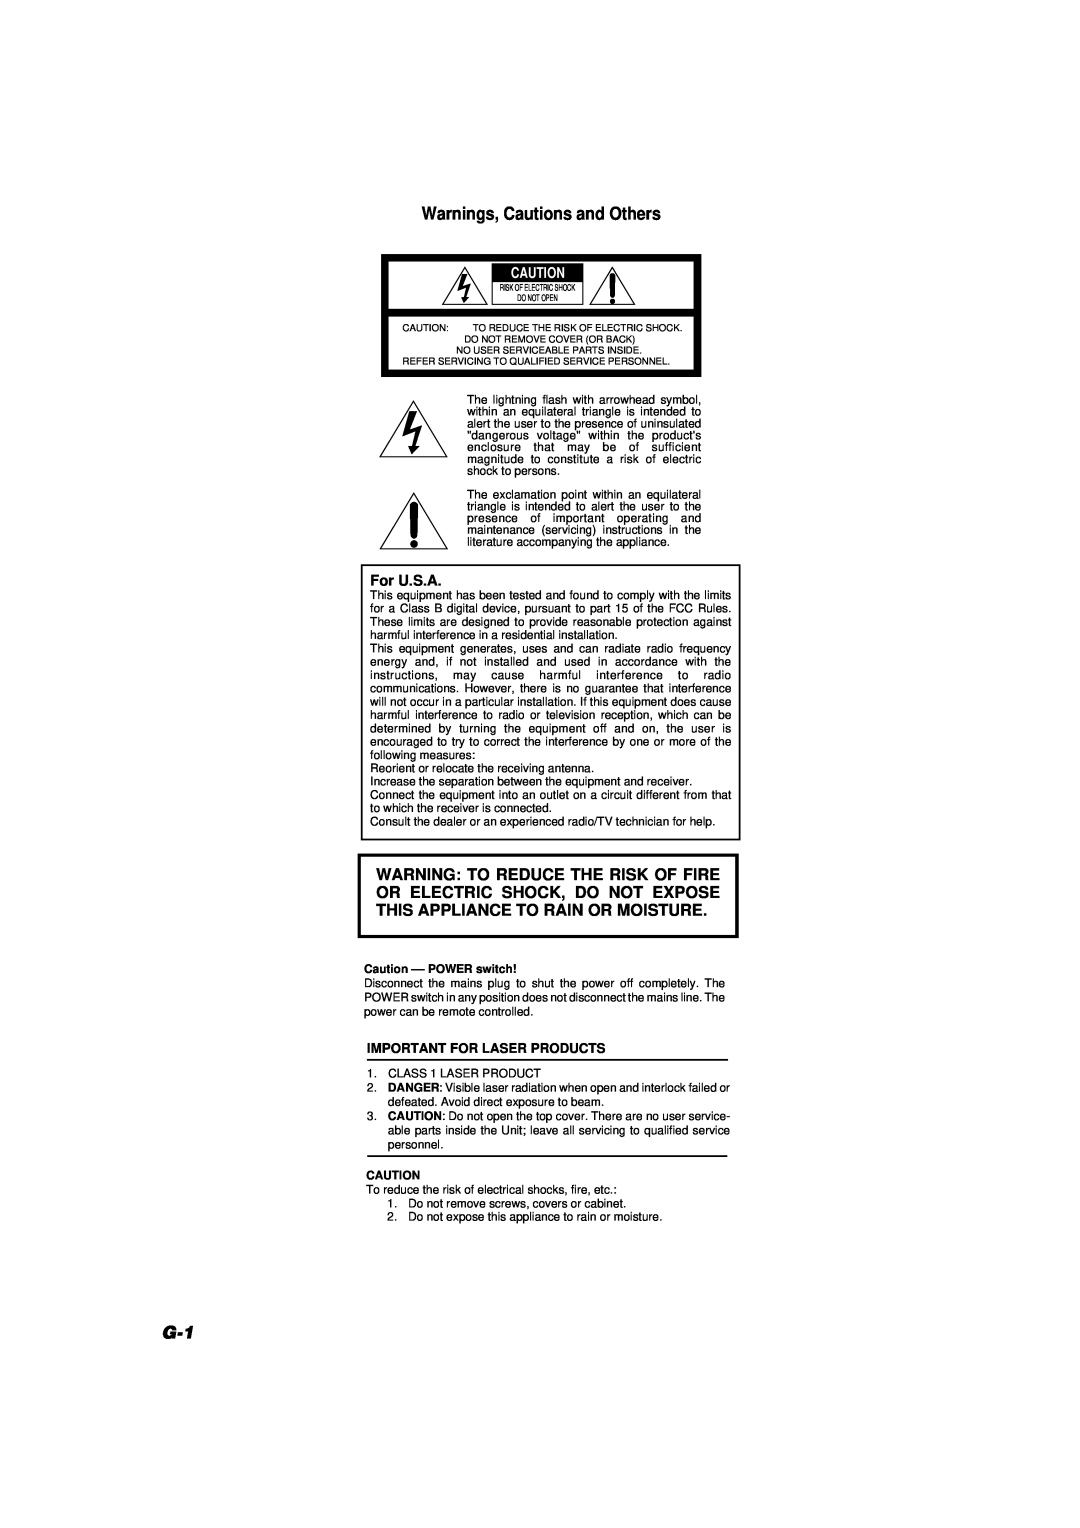 JVC TH-A10 manual For U.S.A, Warnings, Cautions and Others, Important For Laser Products, Caution --POWER switch 